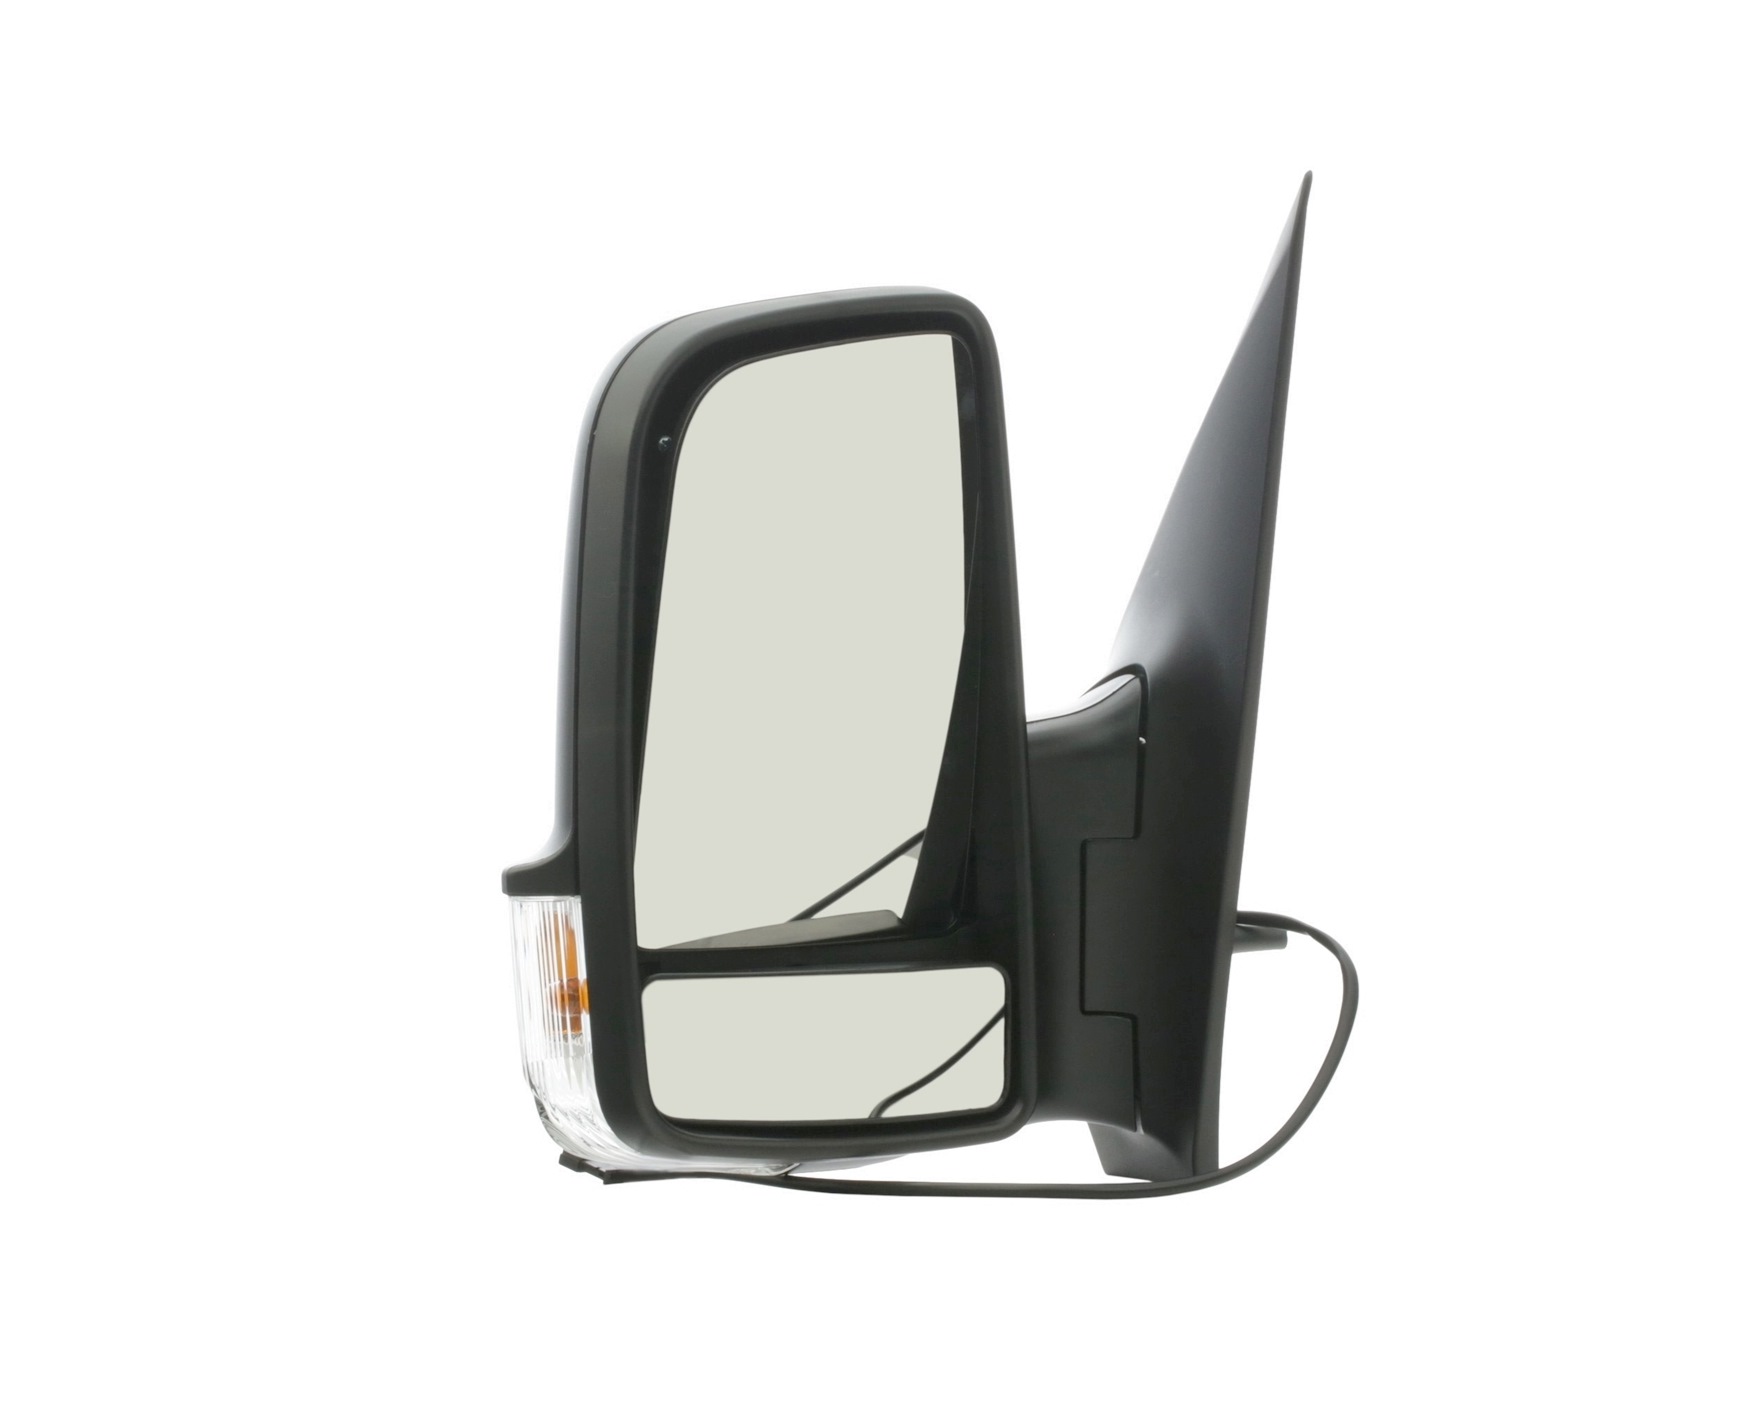 STARK SKOM-1040951 Wing mirror Left, black, Short mirror arm, Convex, with wide angle mirror, for manual mirror adjustment